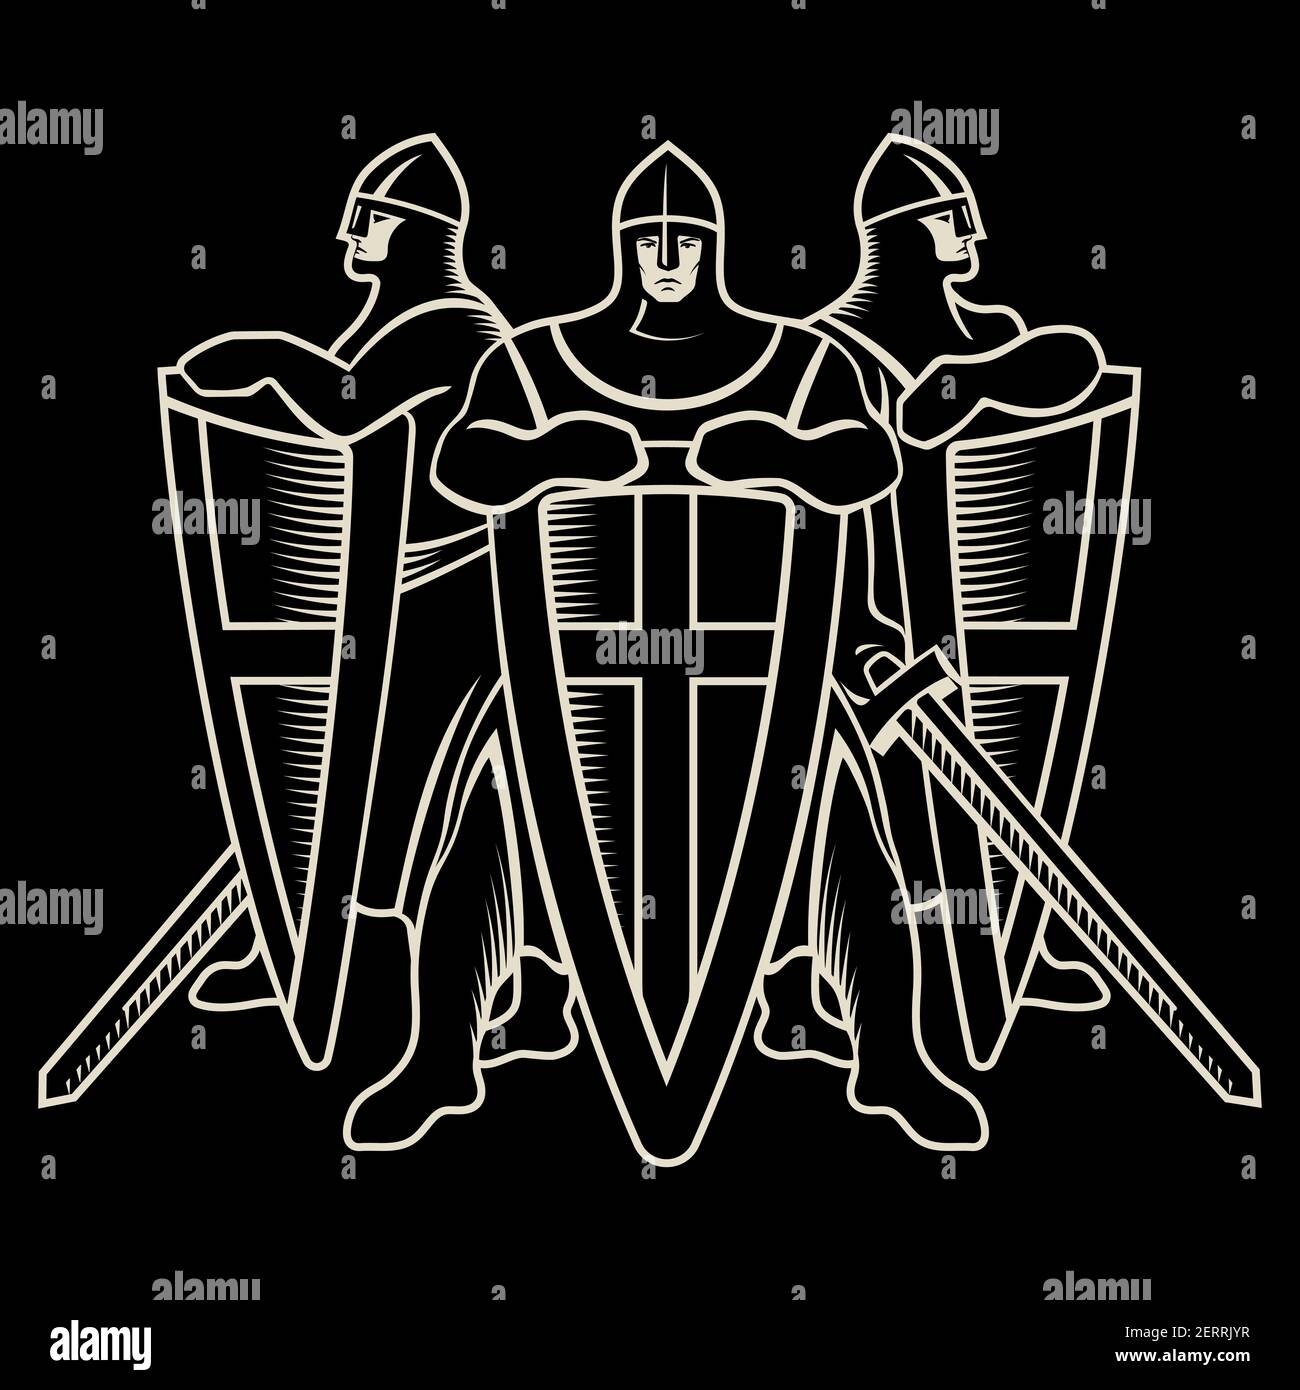 Knightly design. Three Warrior Knight Templar with swords and shields Stock Vector